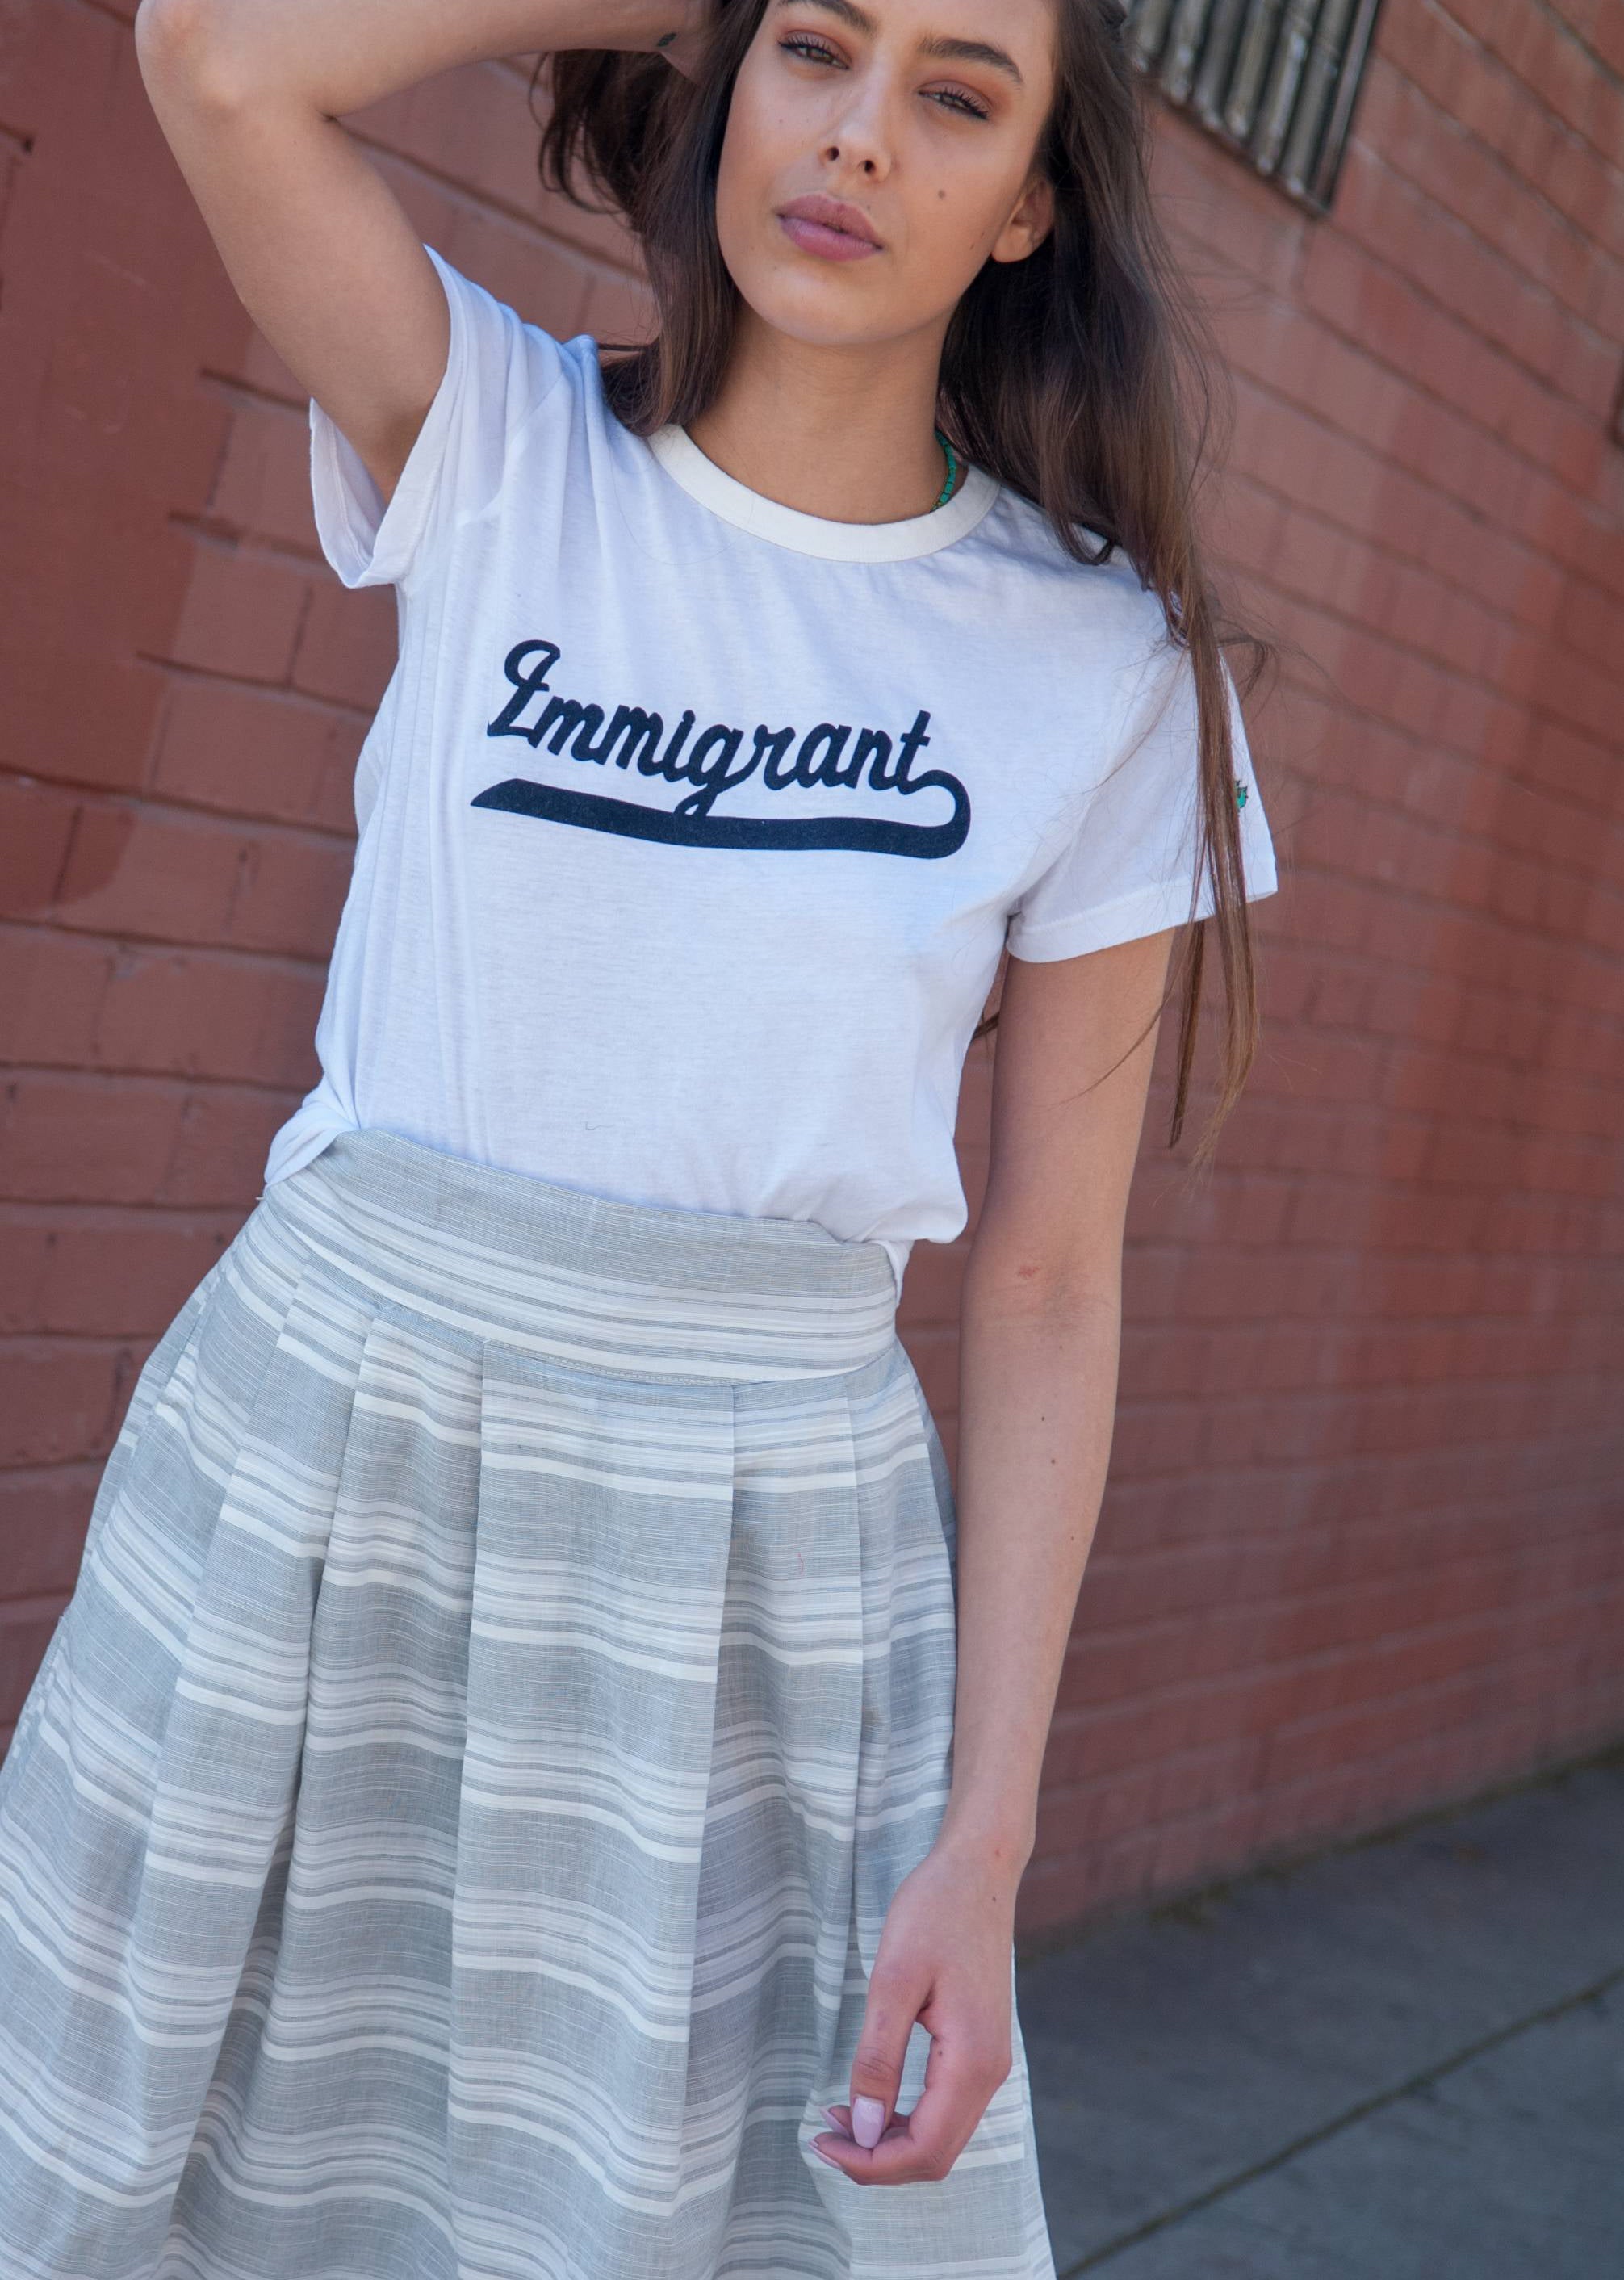 Immigrant Tee - Womens,, The Uplifters- Woo